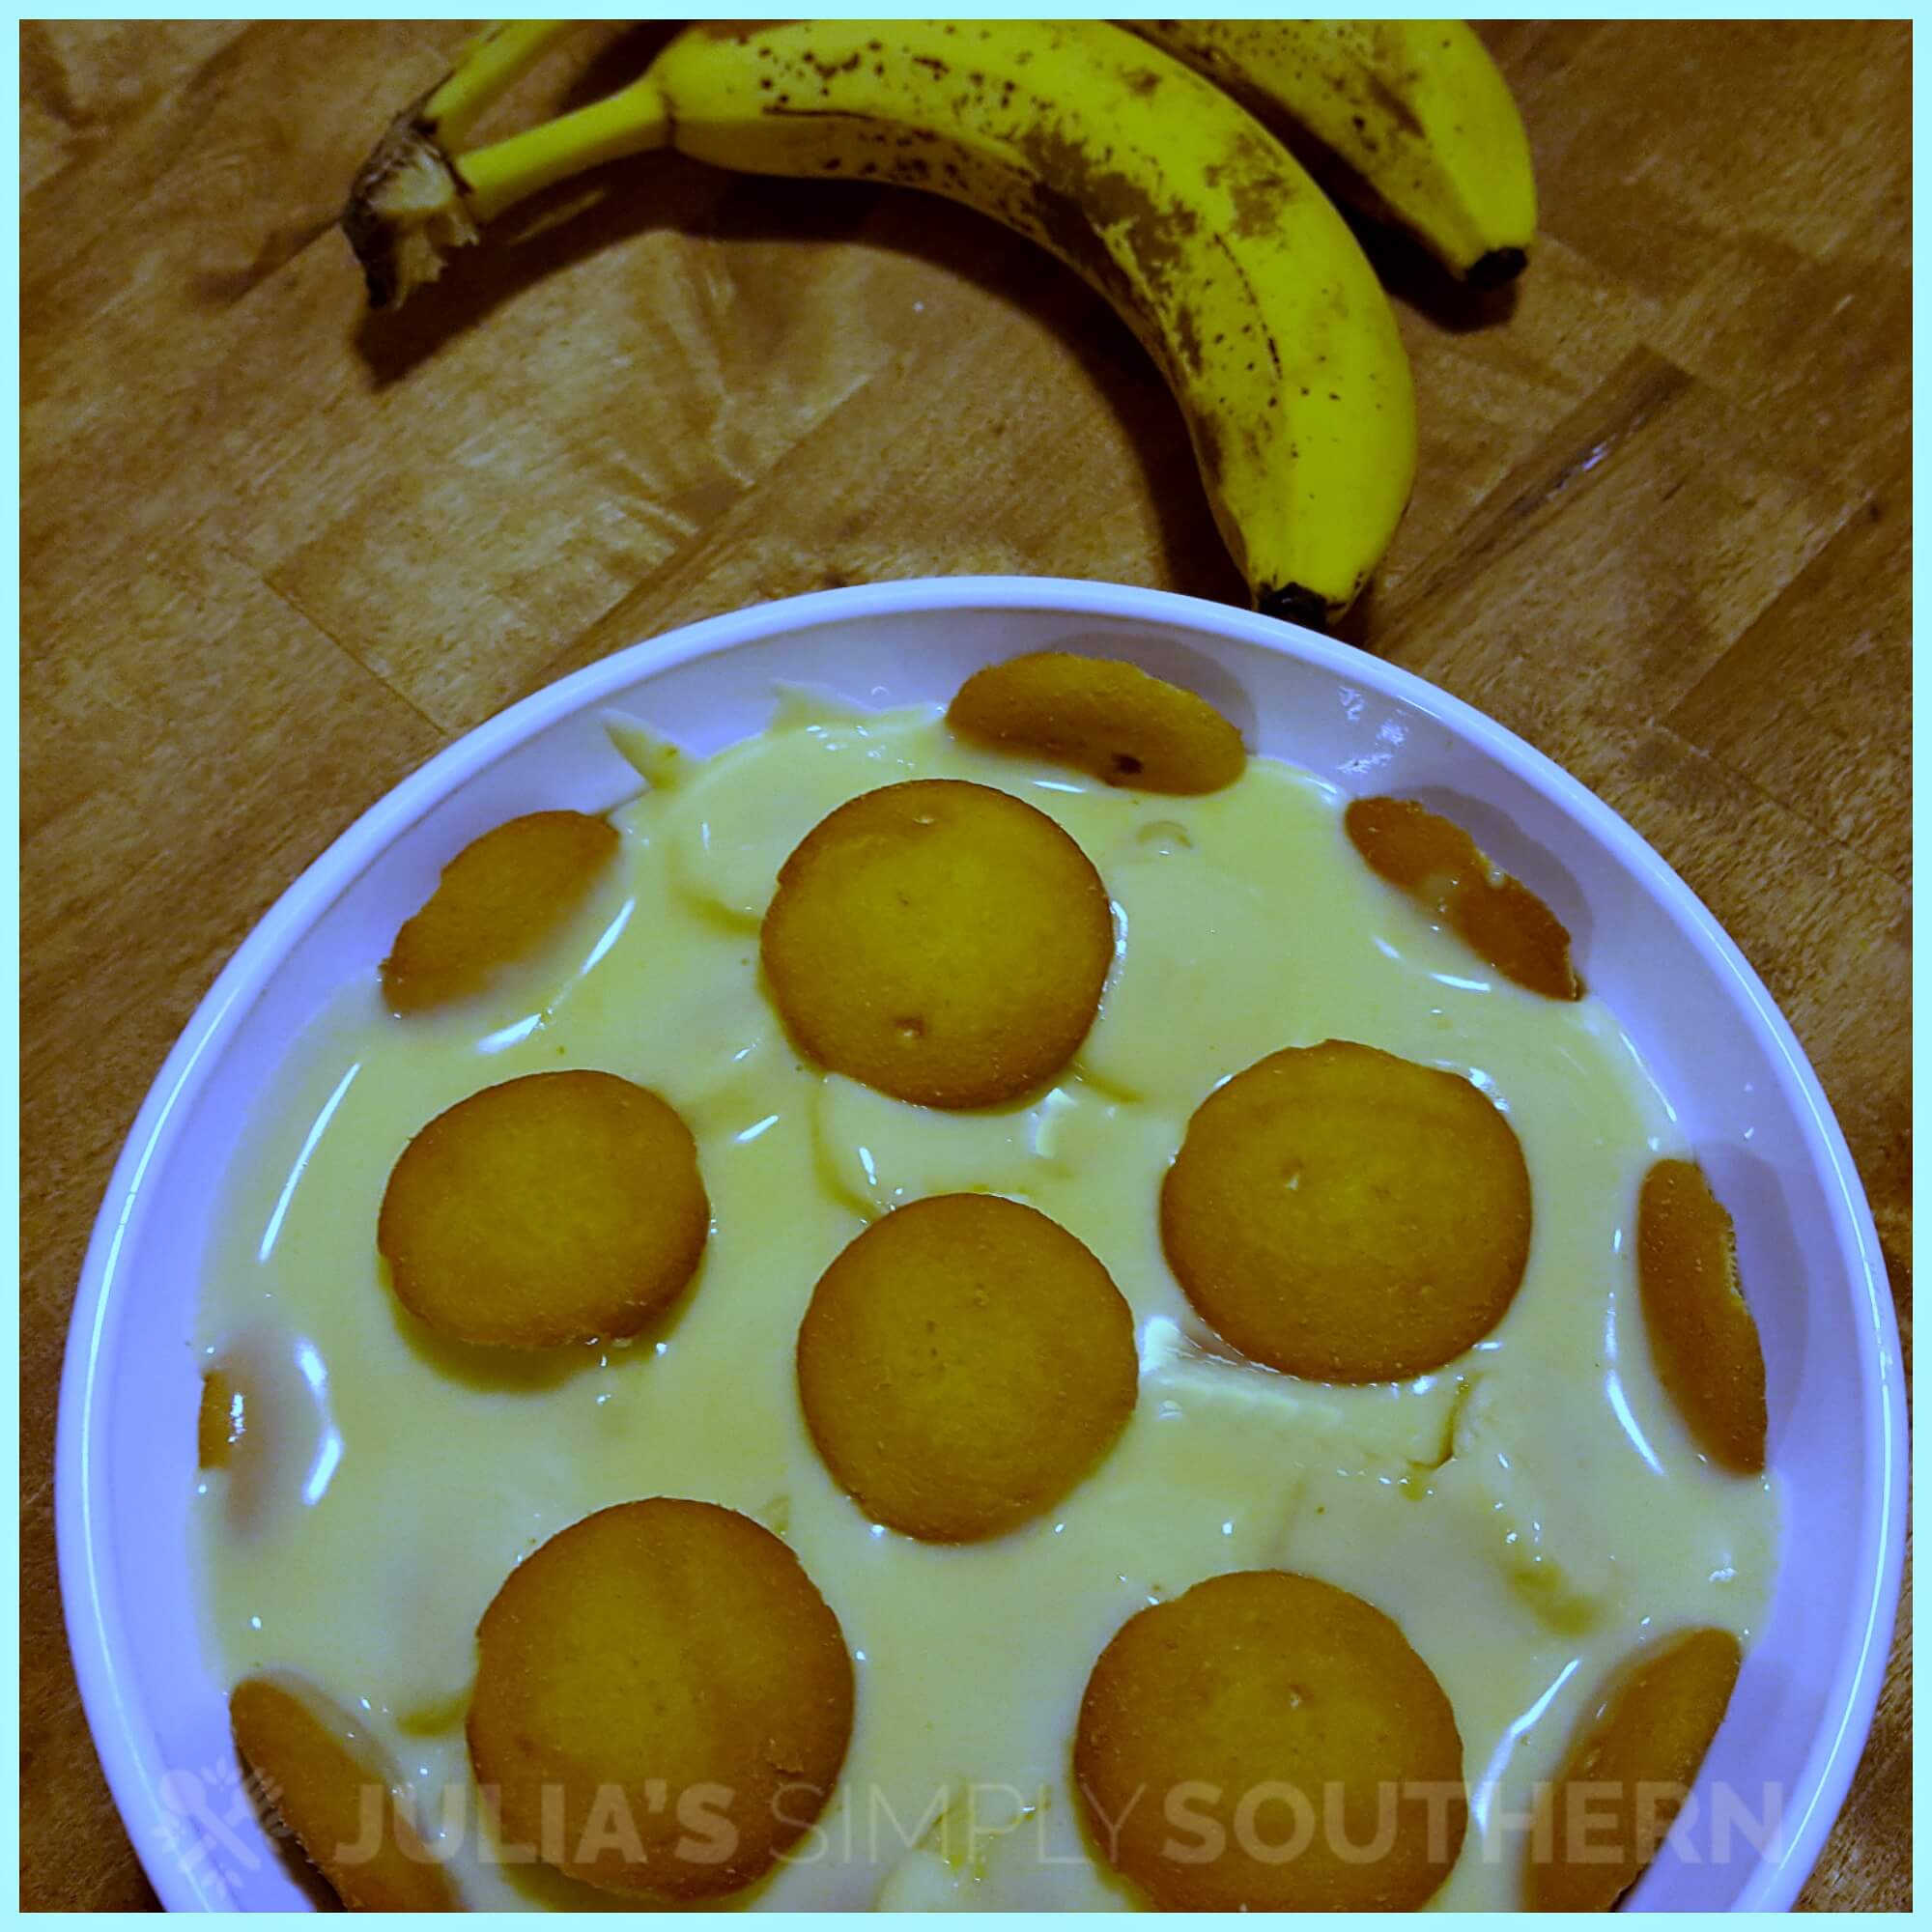 Southern scratch made banana pudding in a white round dish